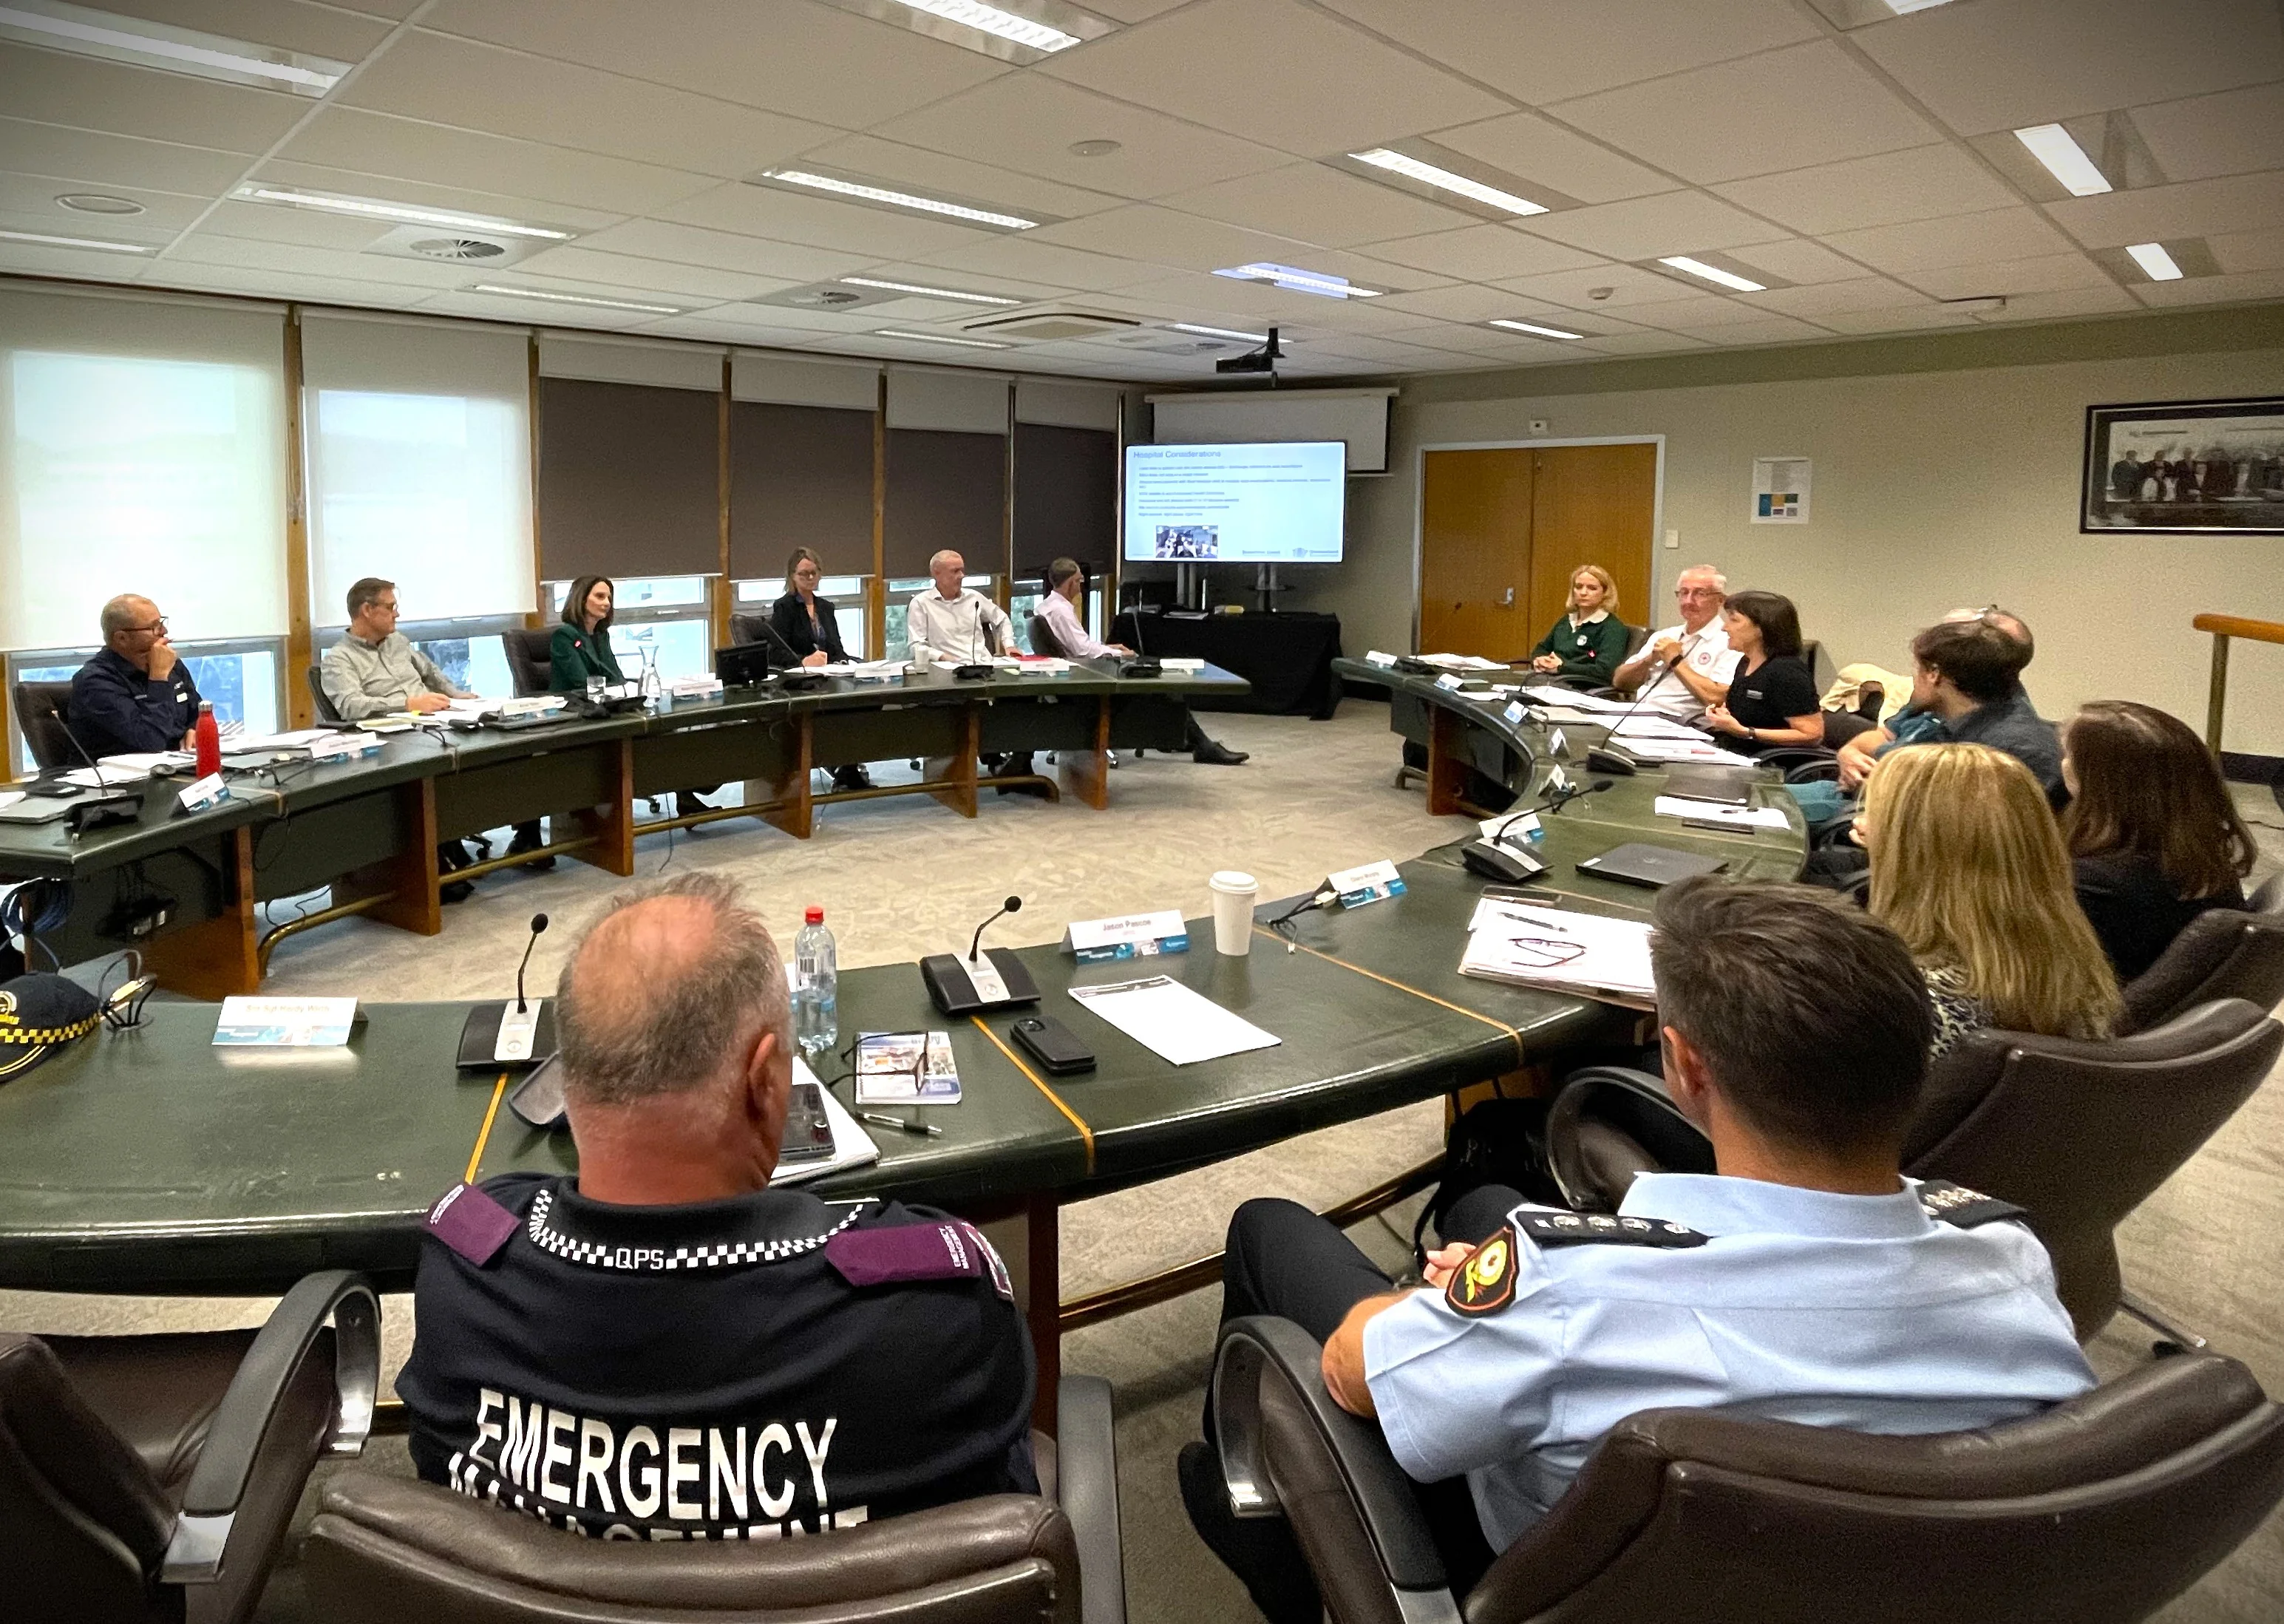 Sunshine Coast Council Disaster and Emergency leaders in Council's large meeting room, sit around a large desk and present reports from their emergency organisations.